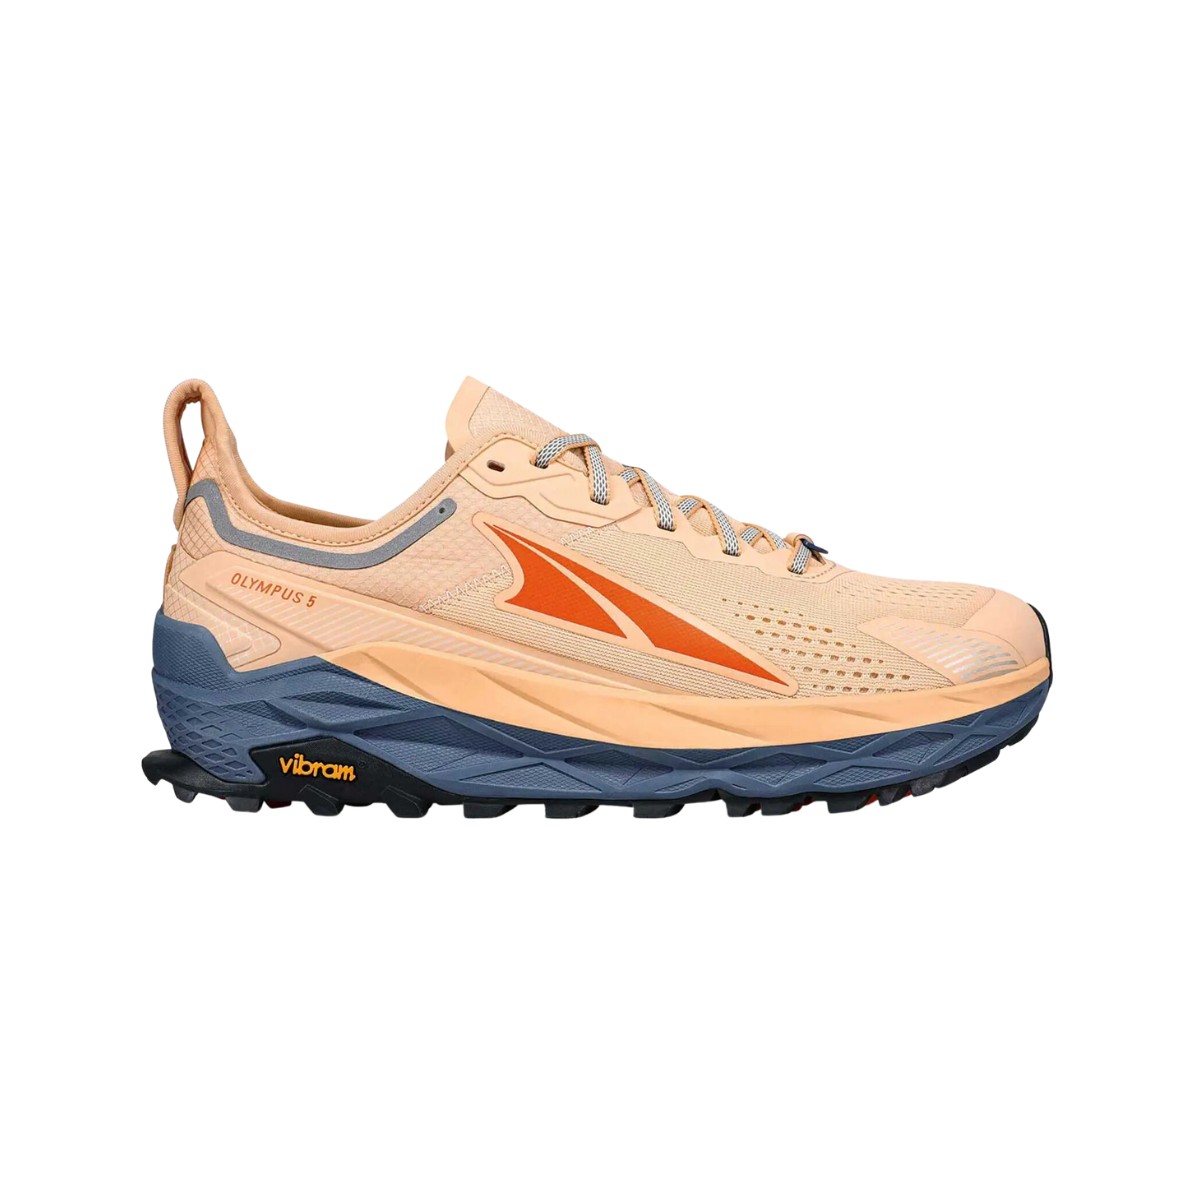 Altra Olympus 5 Orange Blue I Shoes Offer At The Best Price